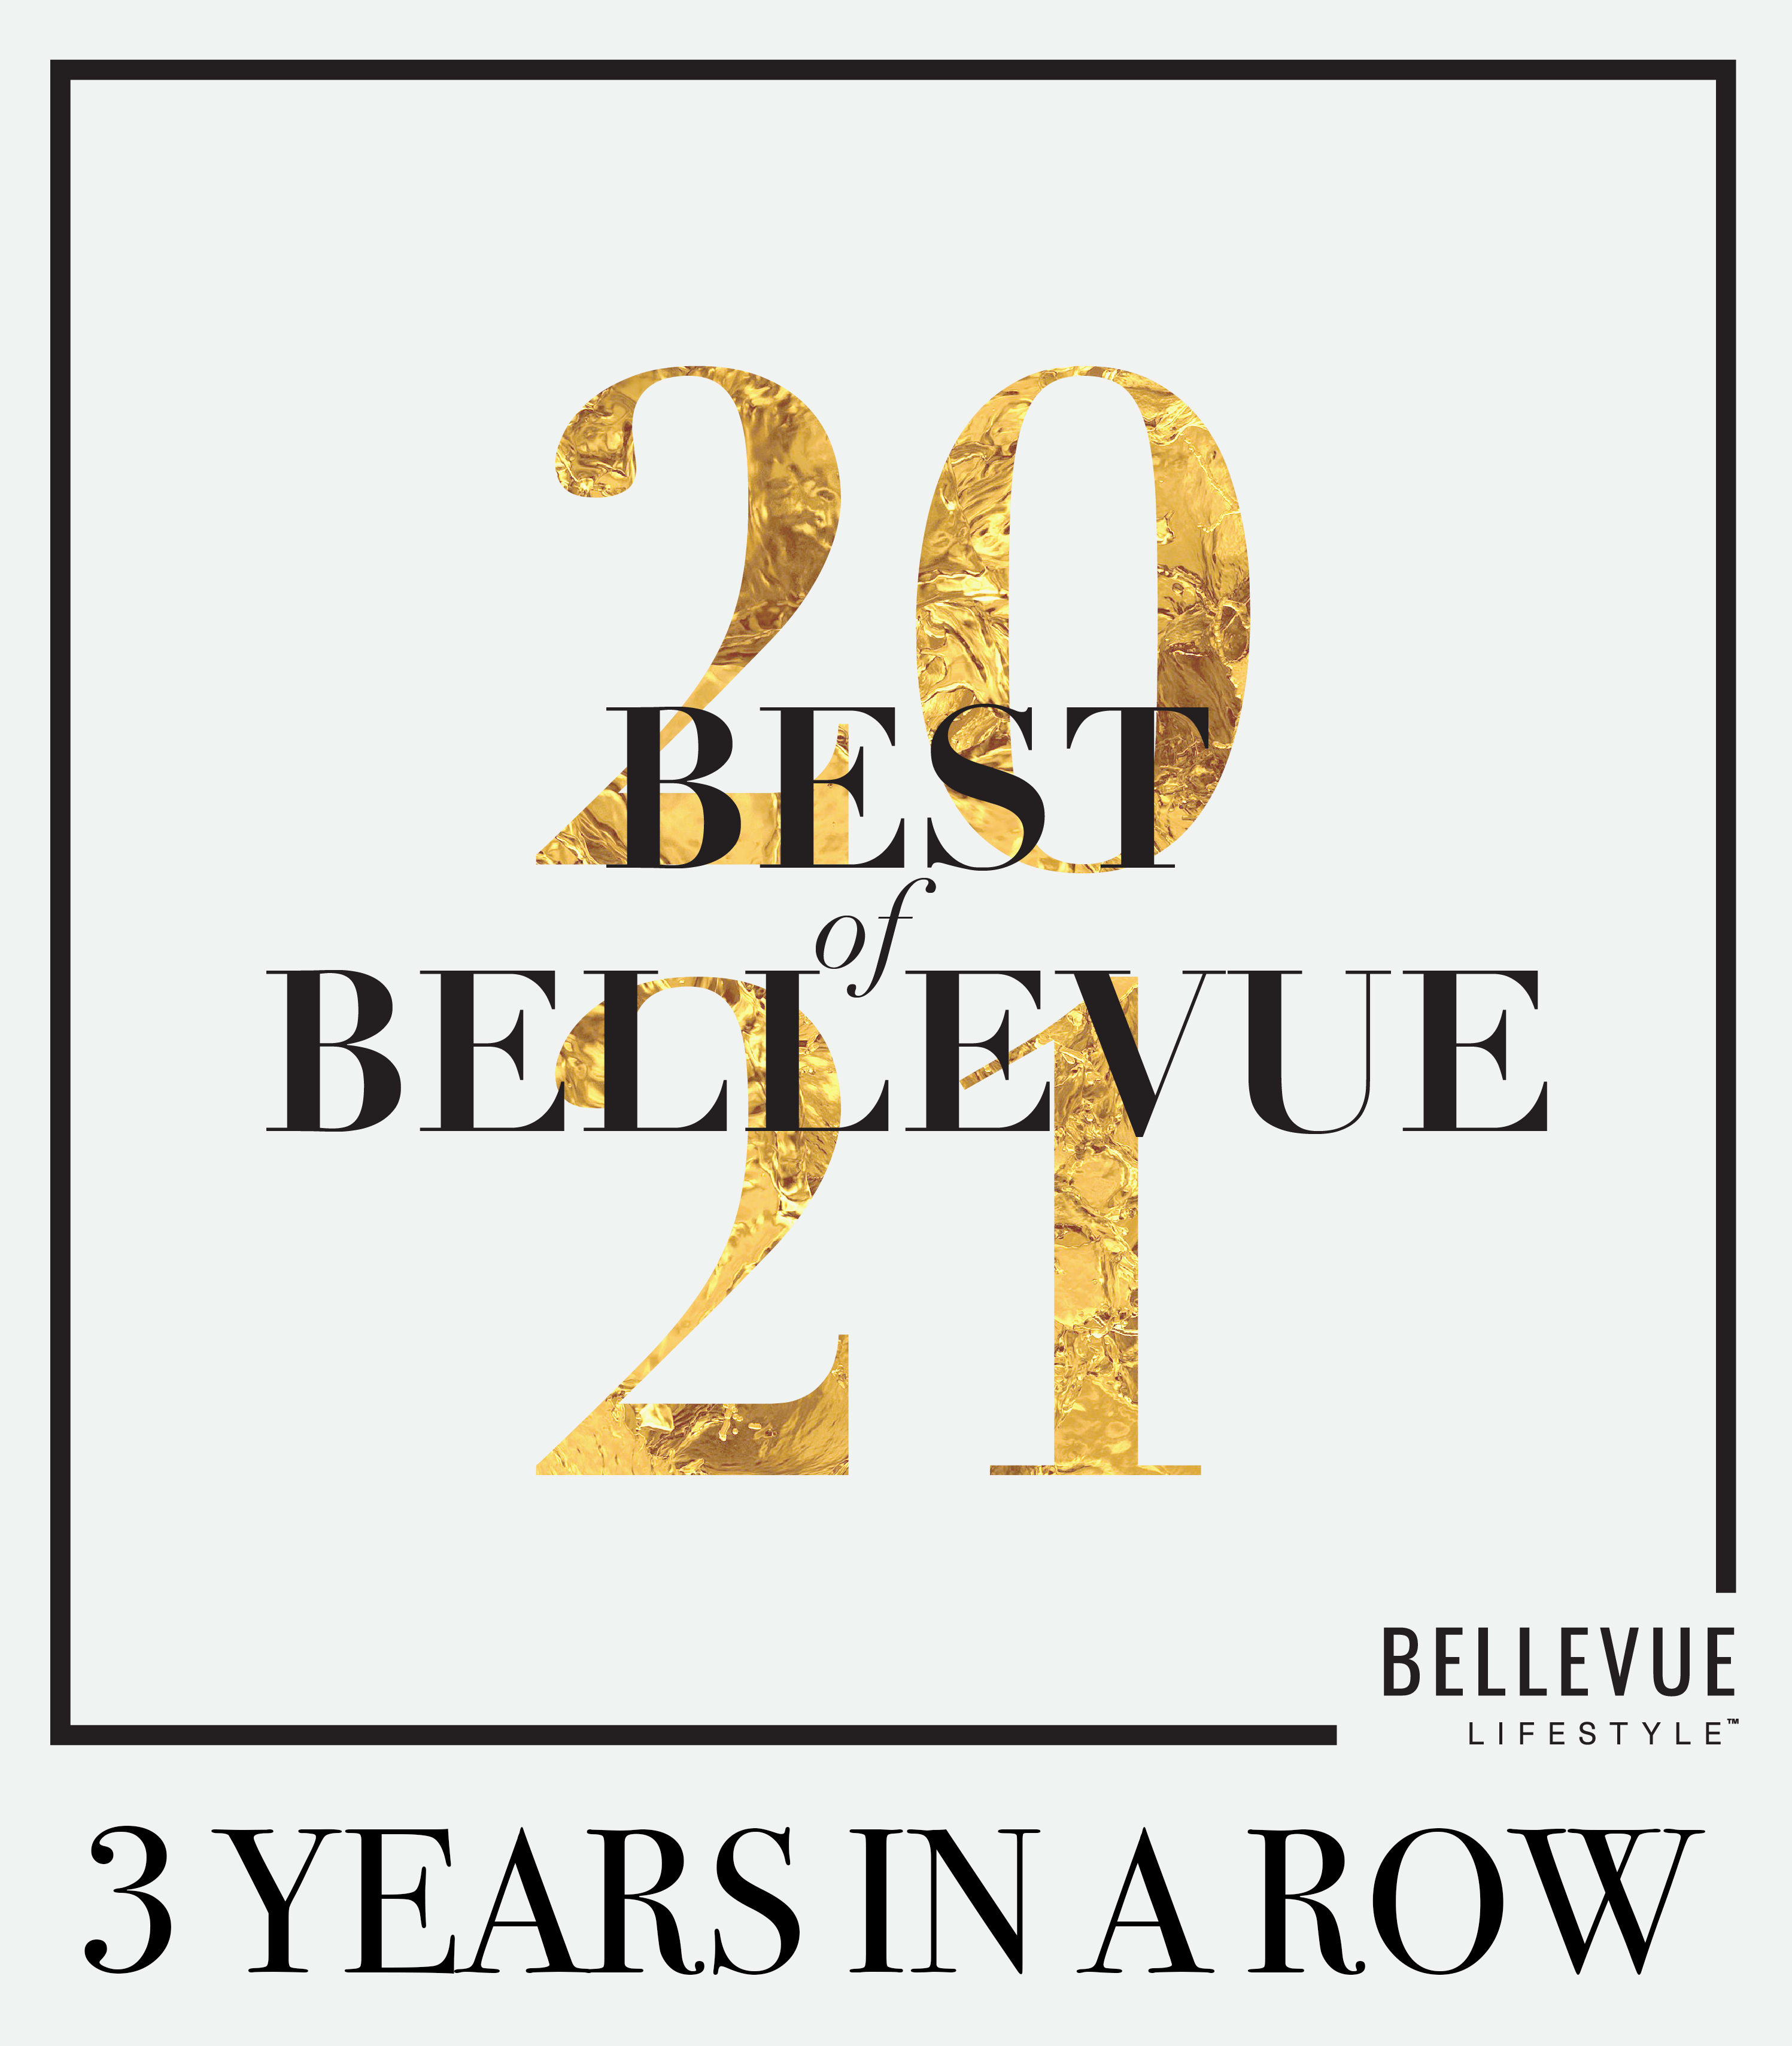 The Bellettini is awarded withBest of Bellvue Three years in a row recognition.